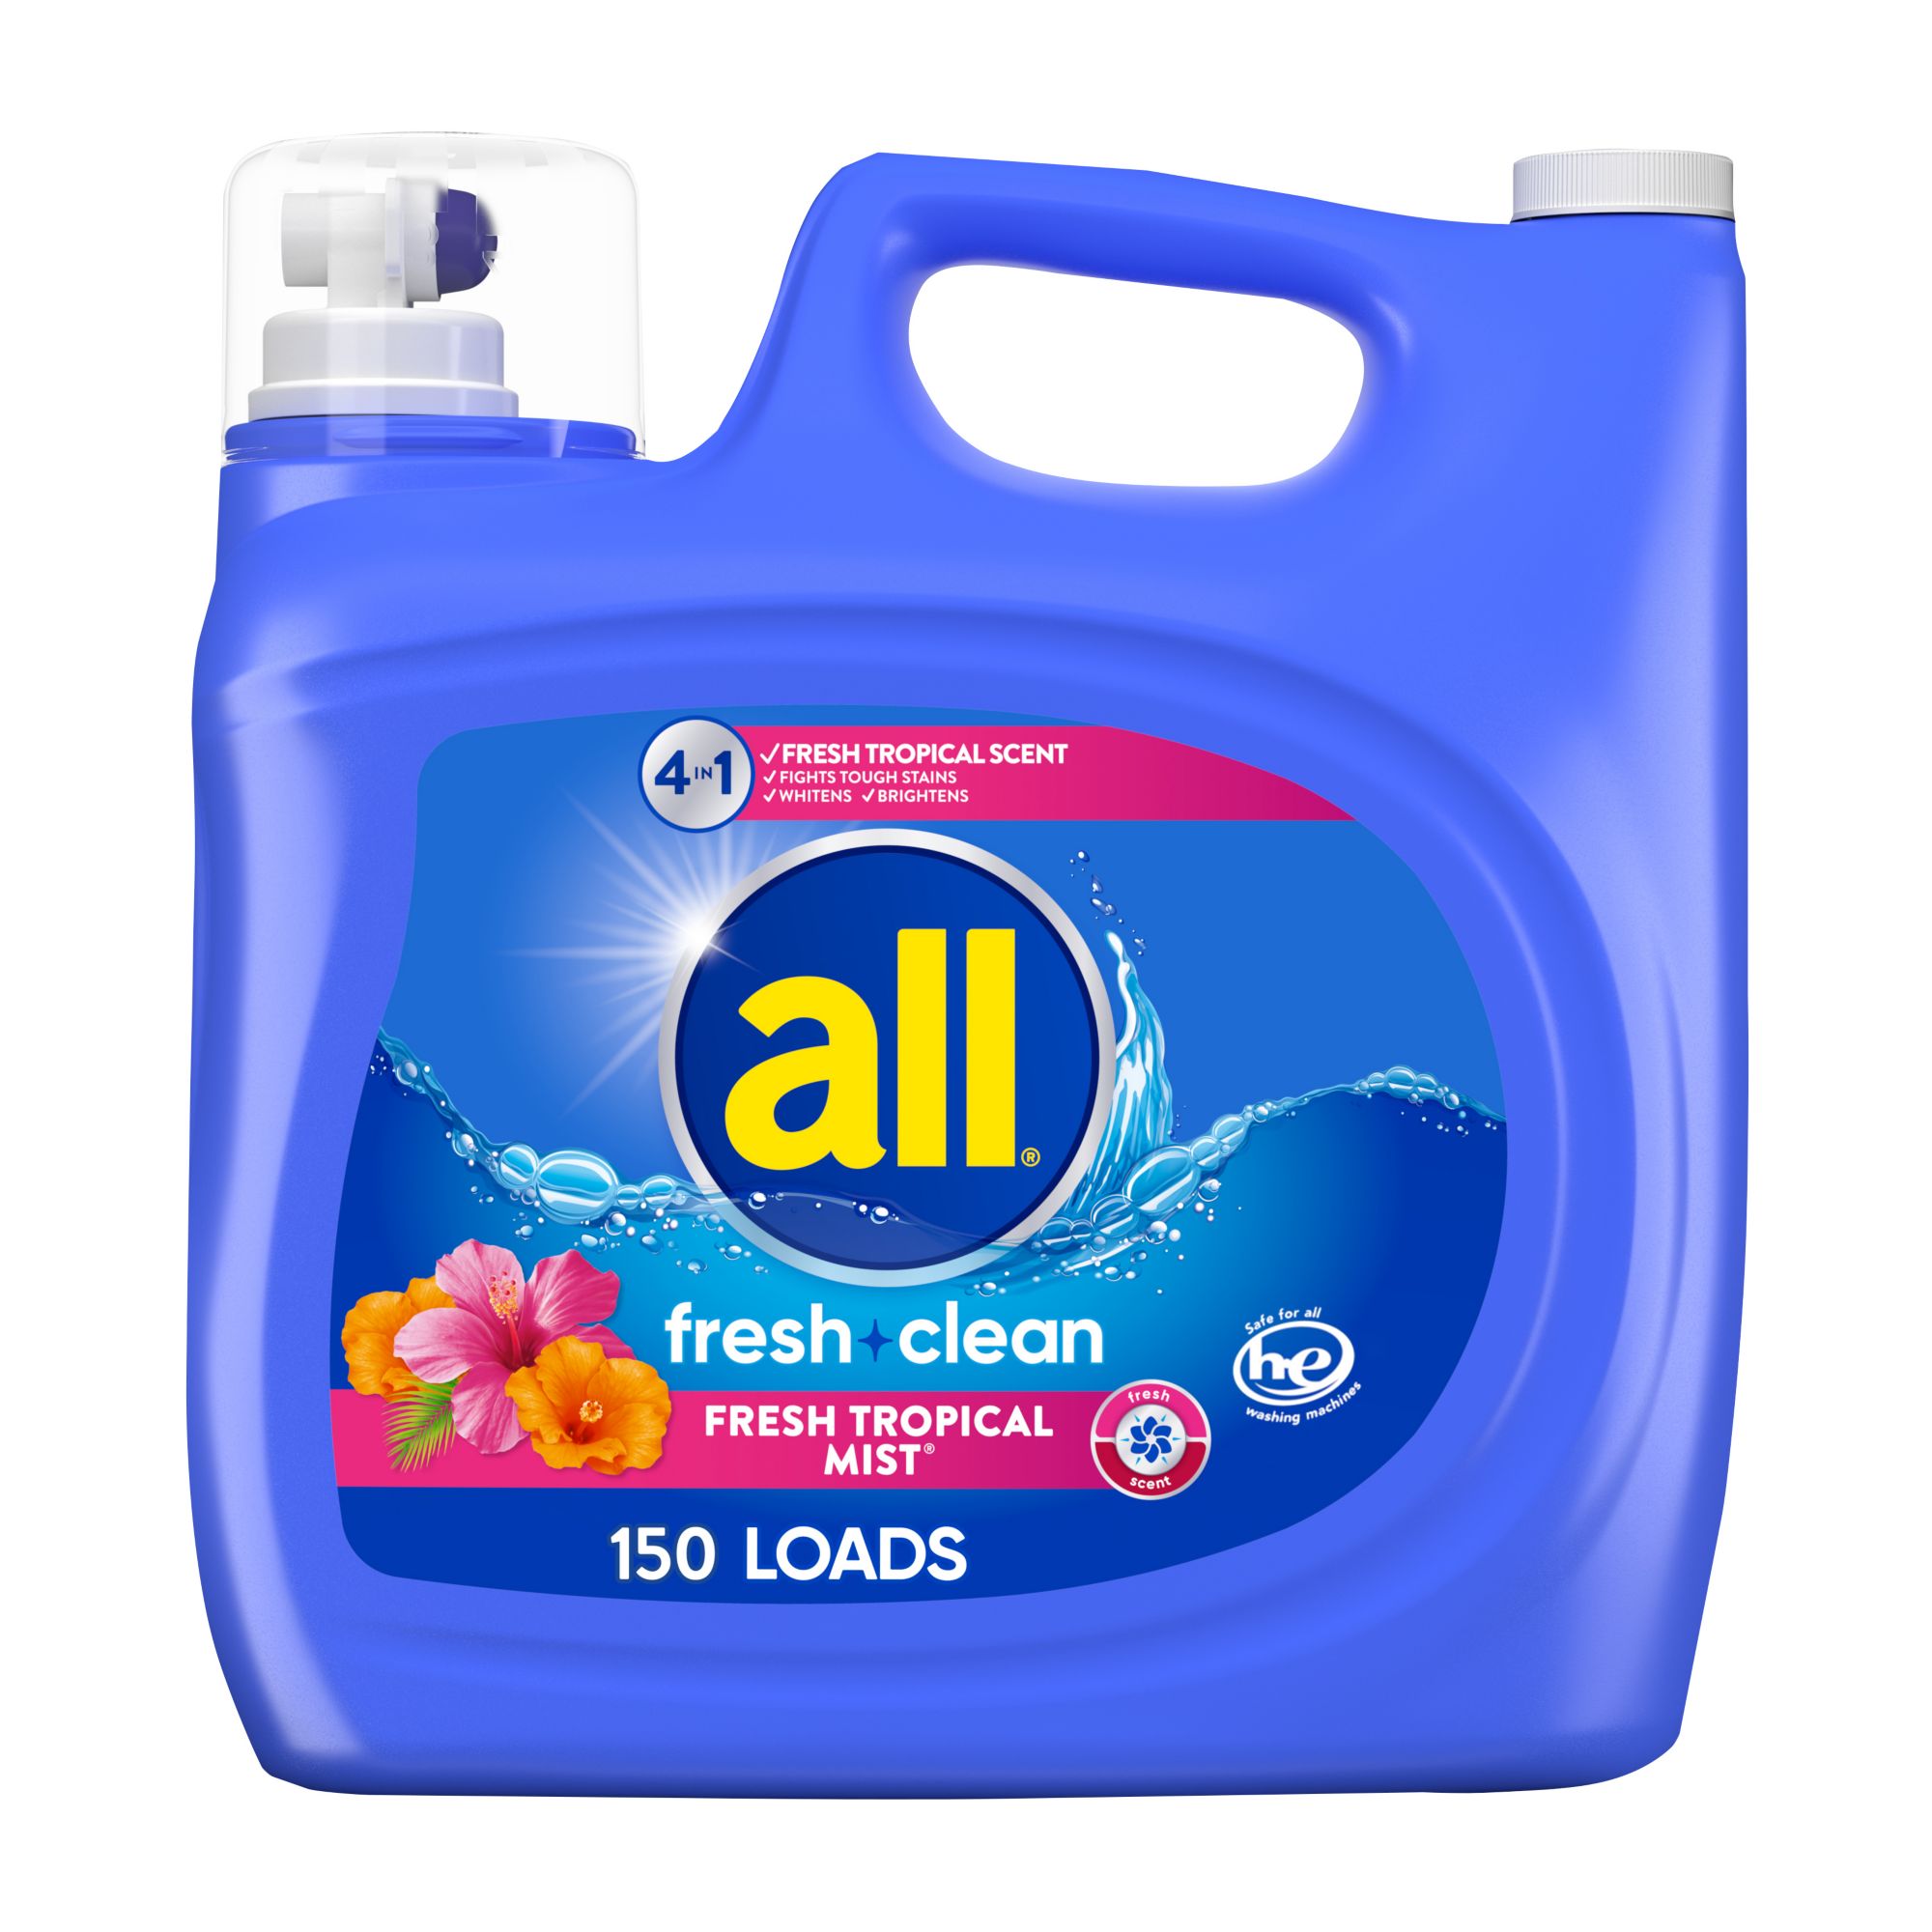 All Stainlifters Detergent, HE - 150 fl oz